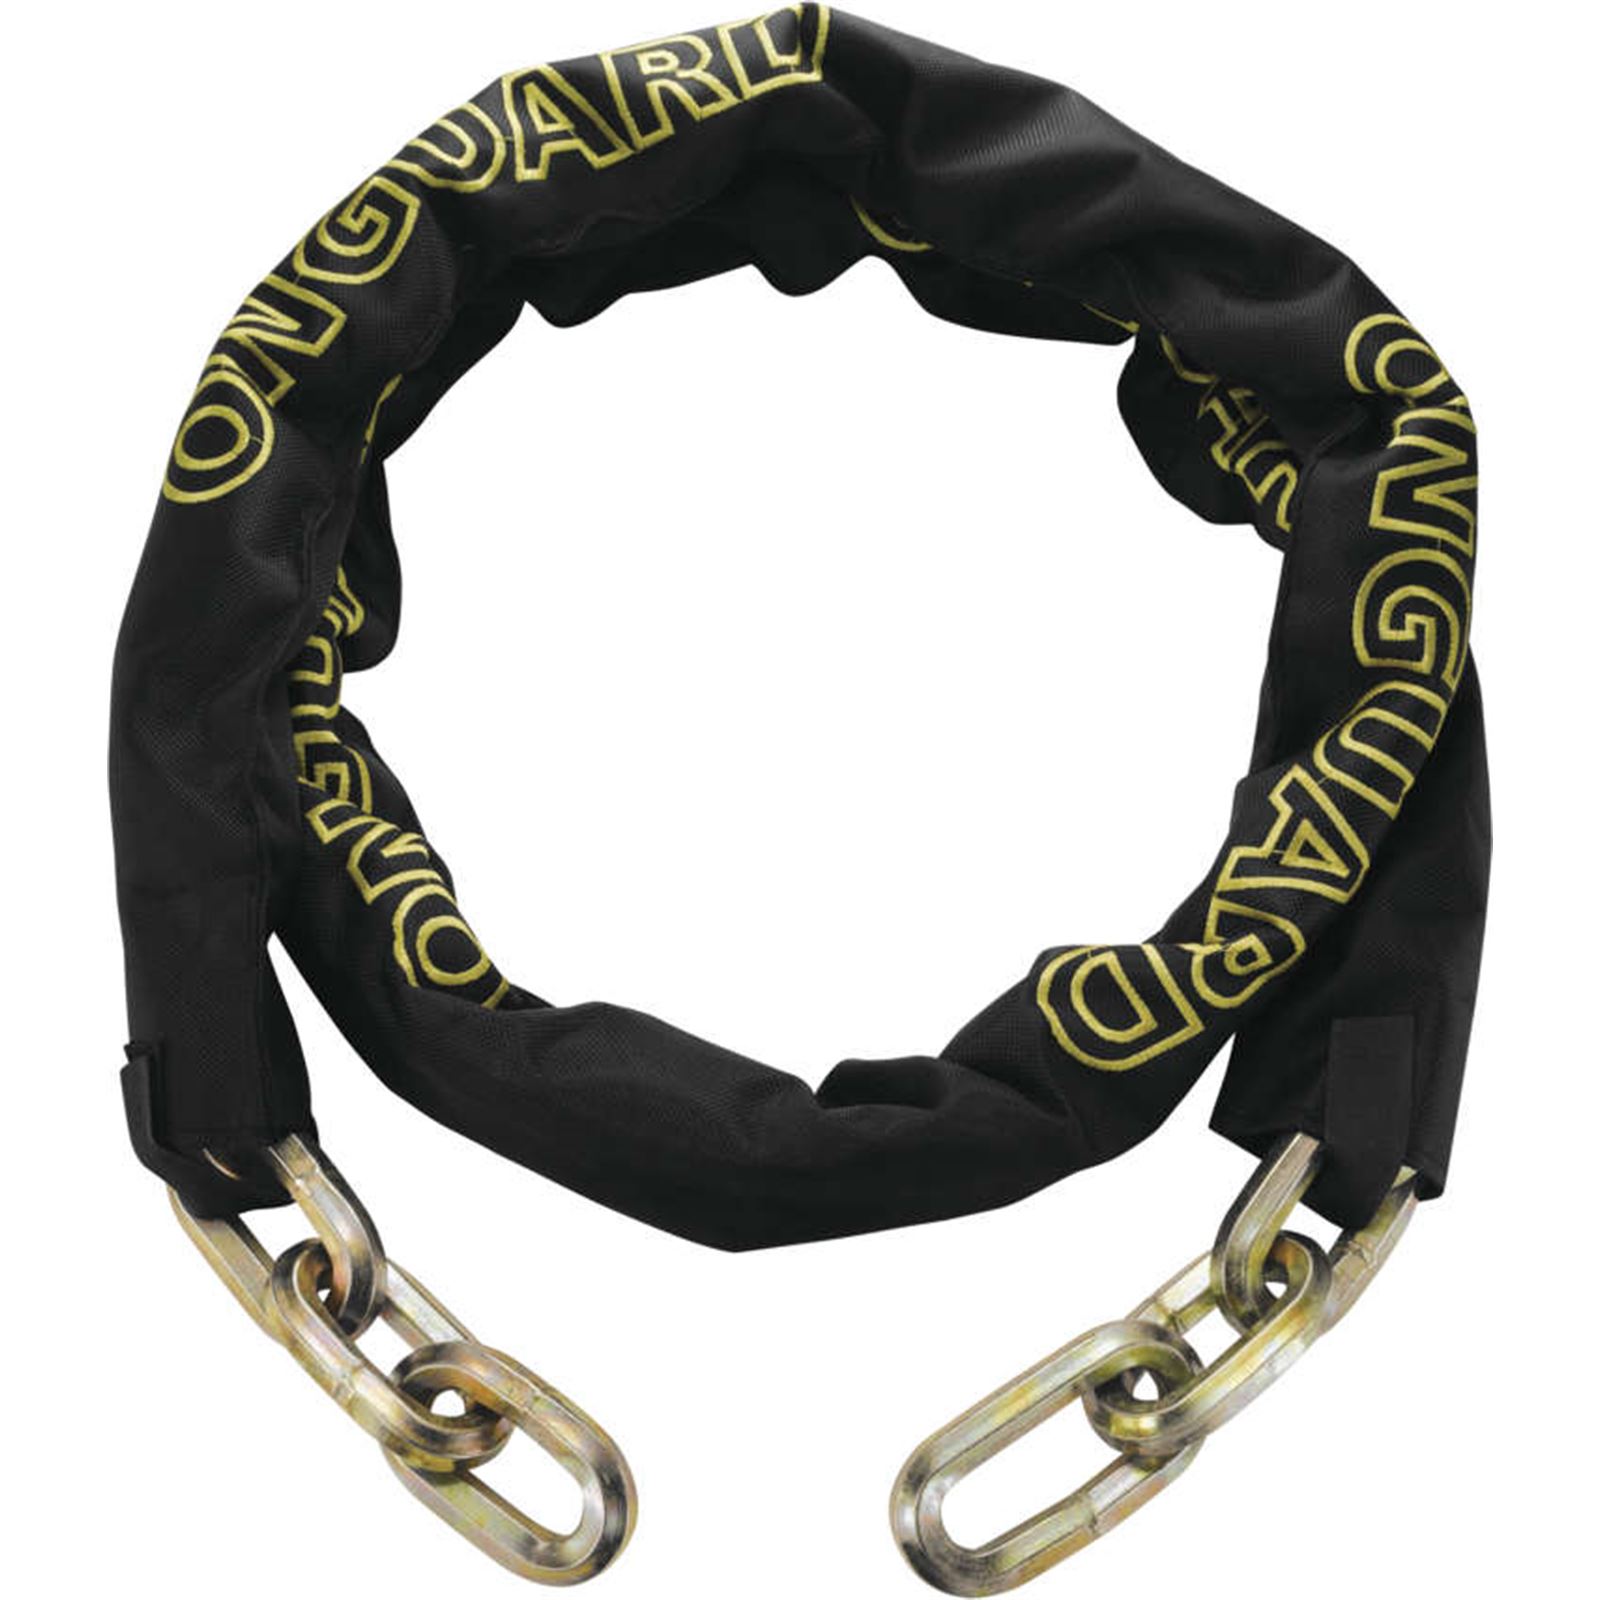 Onguard Beast Series Chain Only